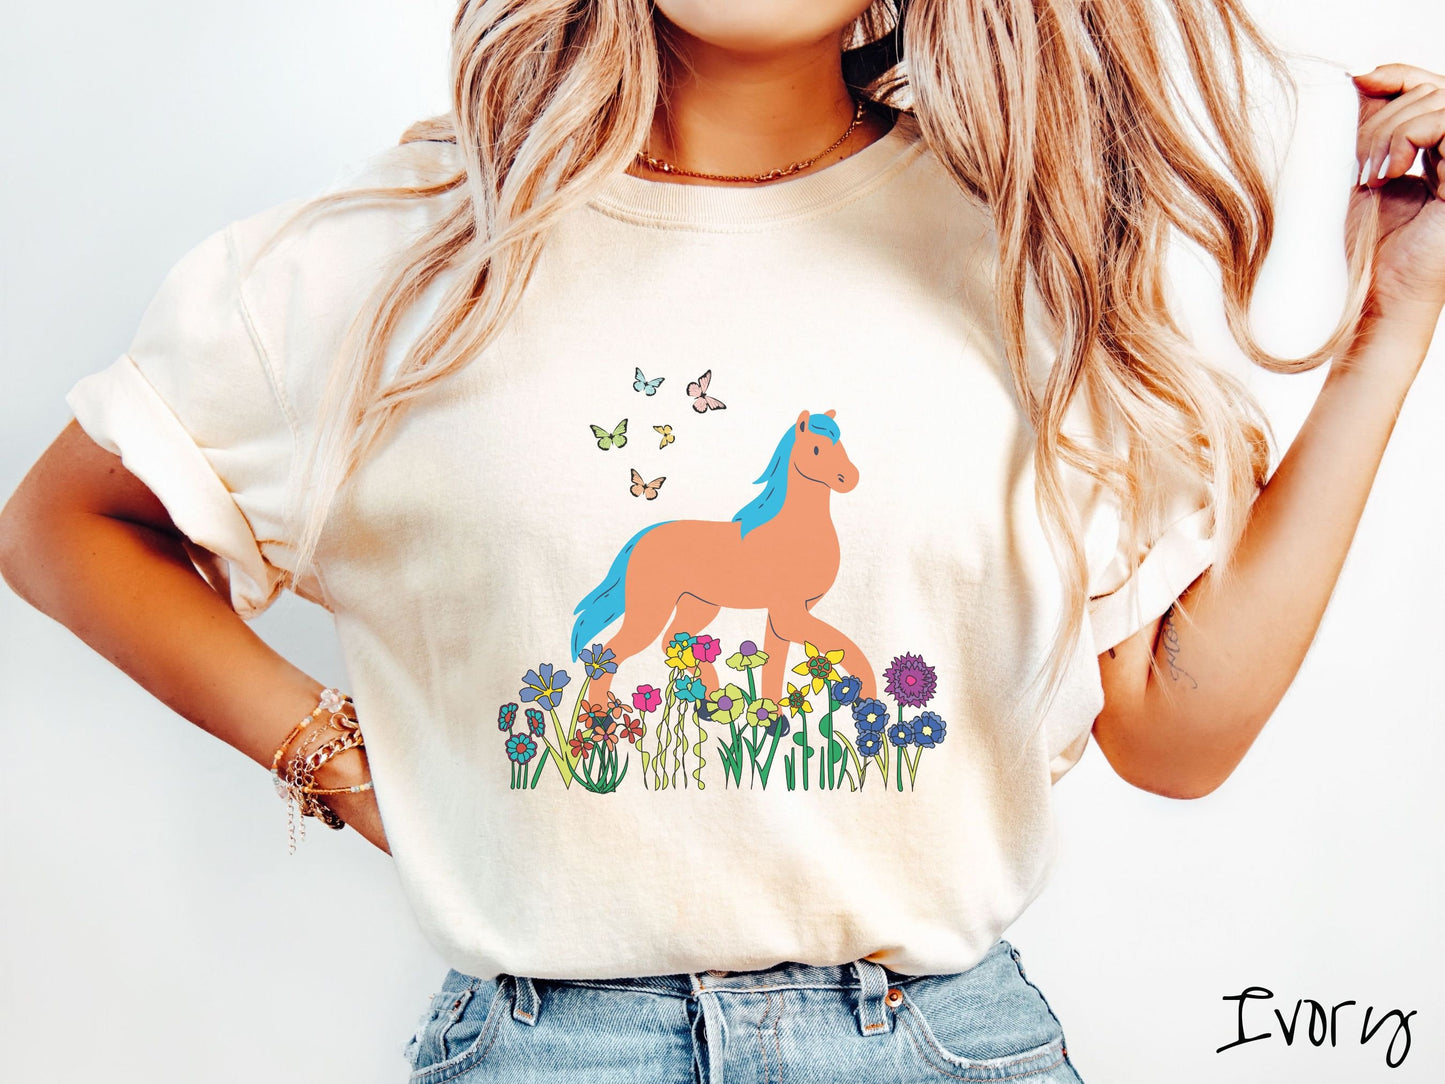 A woman wearing a cute, vintage ivory colored Comfort Colors shirt with a brown horse with blue hair walking through a field of colorful flowers and grass. There are colorful butterflies flying above the horse.